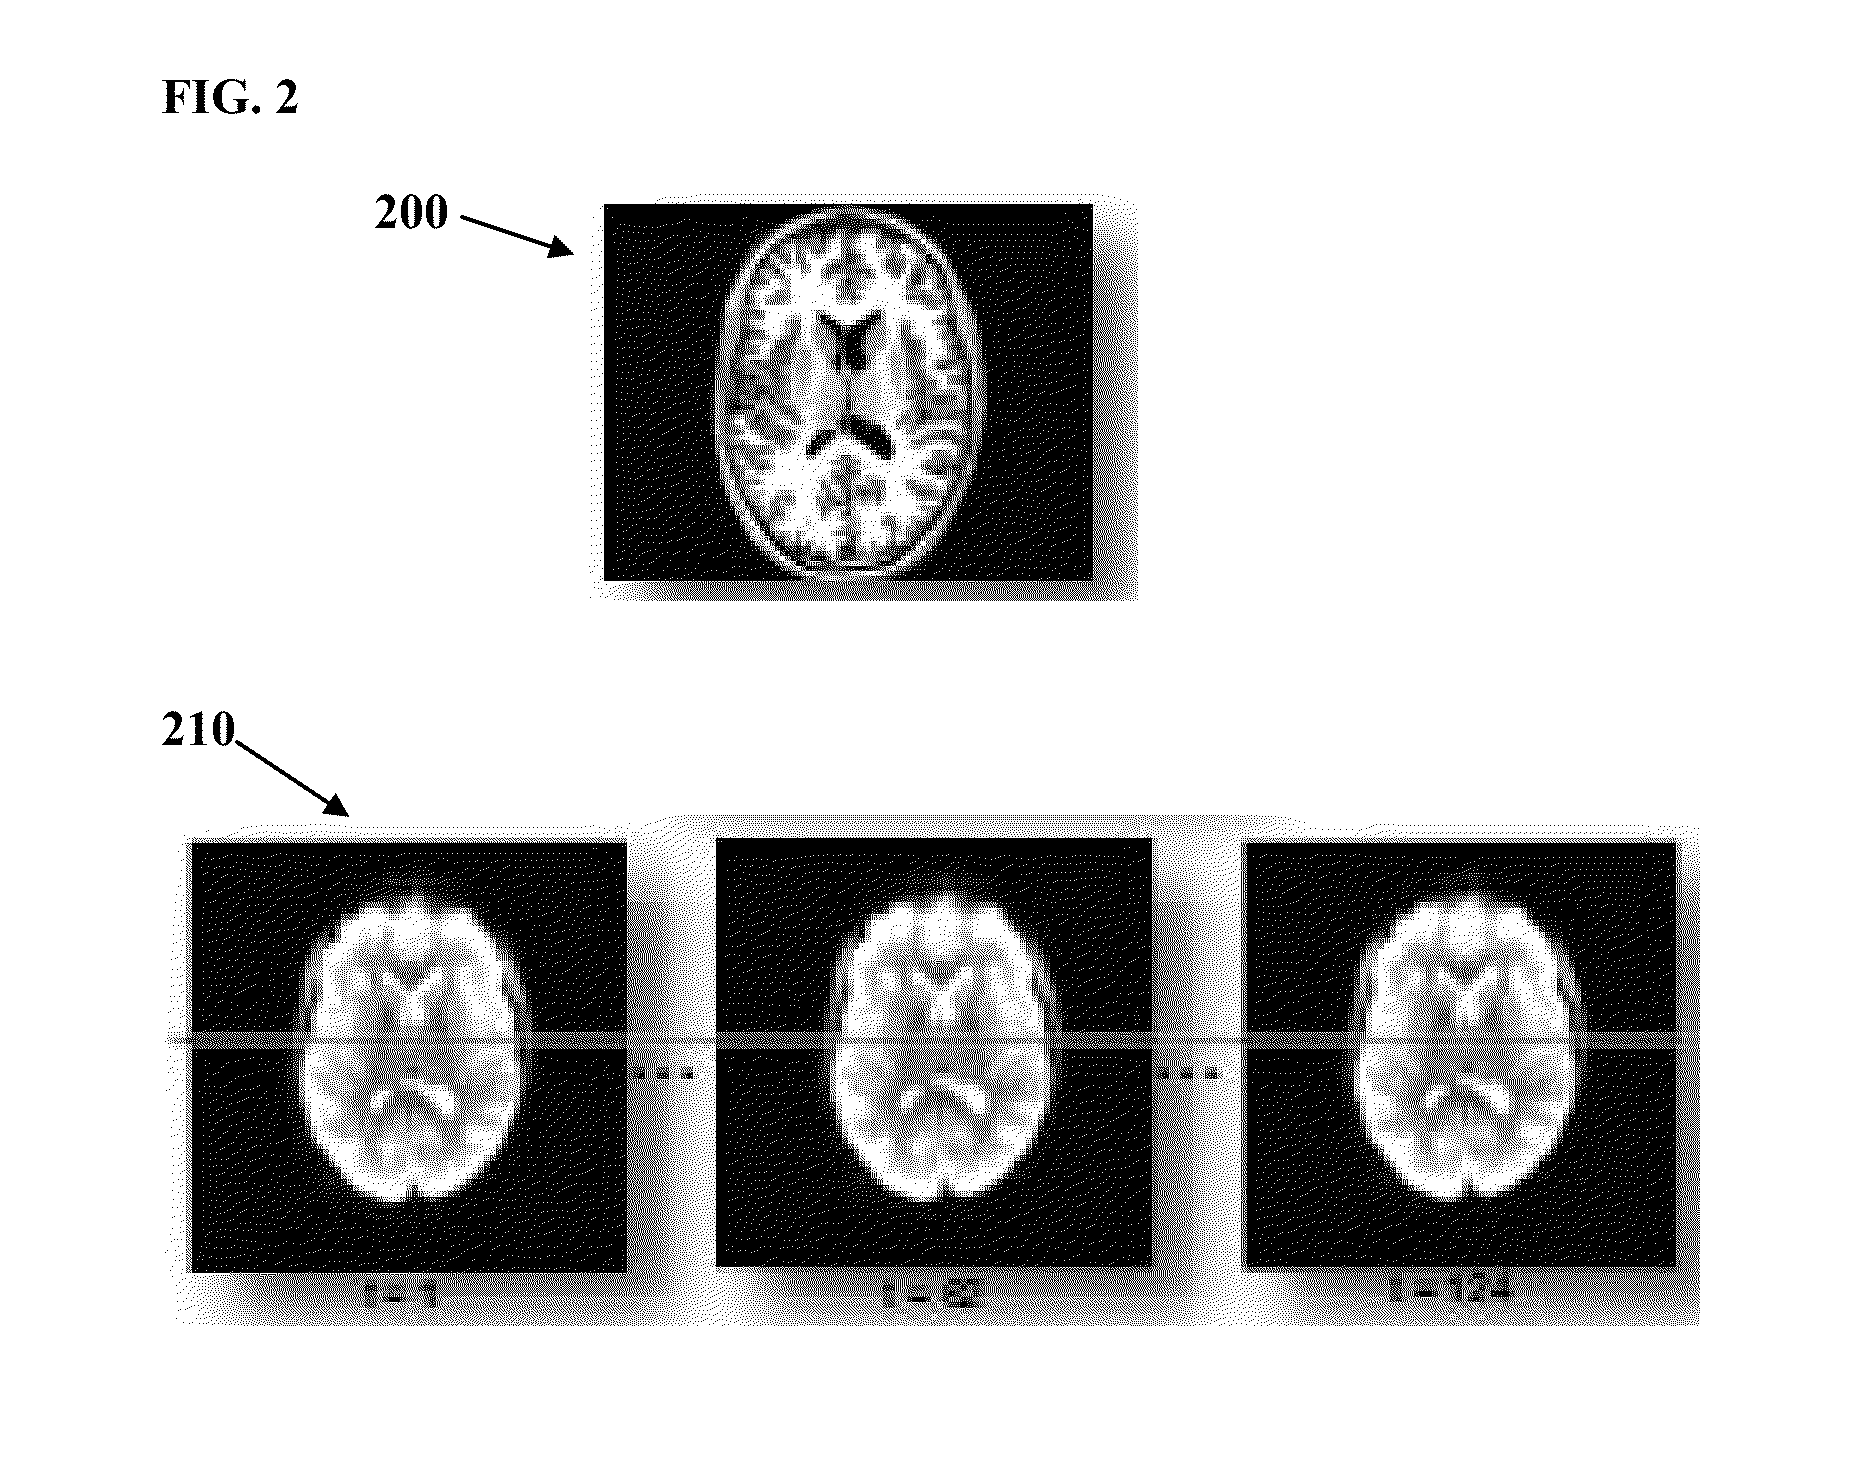 Method and System for Diagnosis of Attention Deficit Hyperactivity Disorder from Magnetic Resonance Images